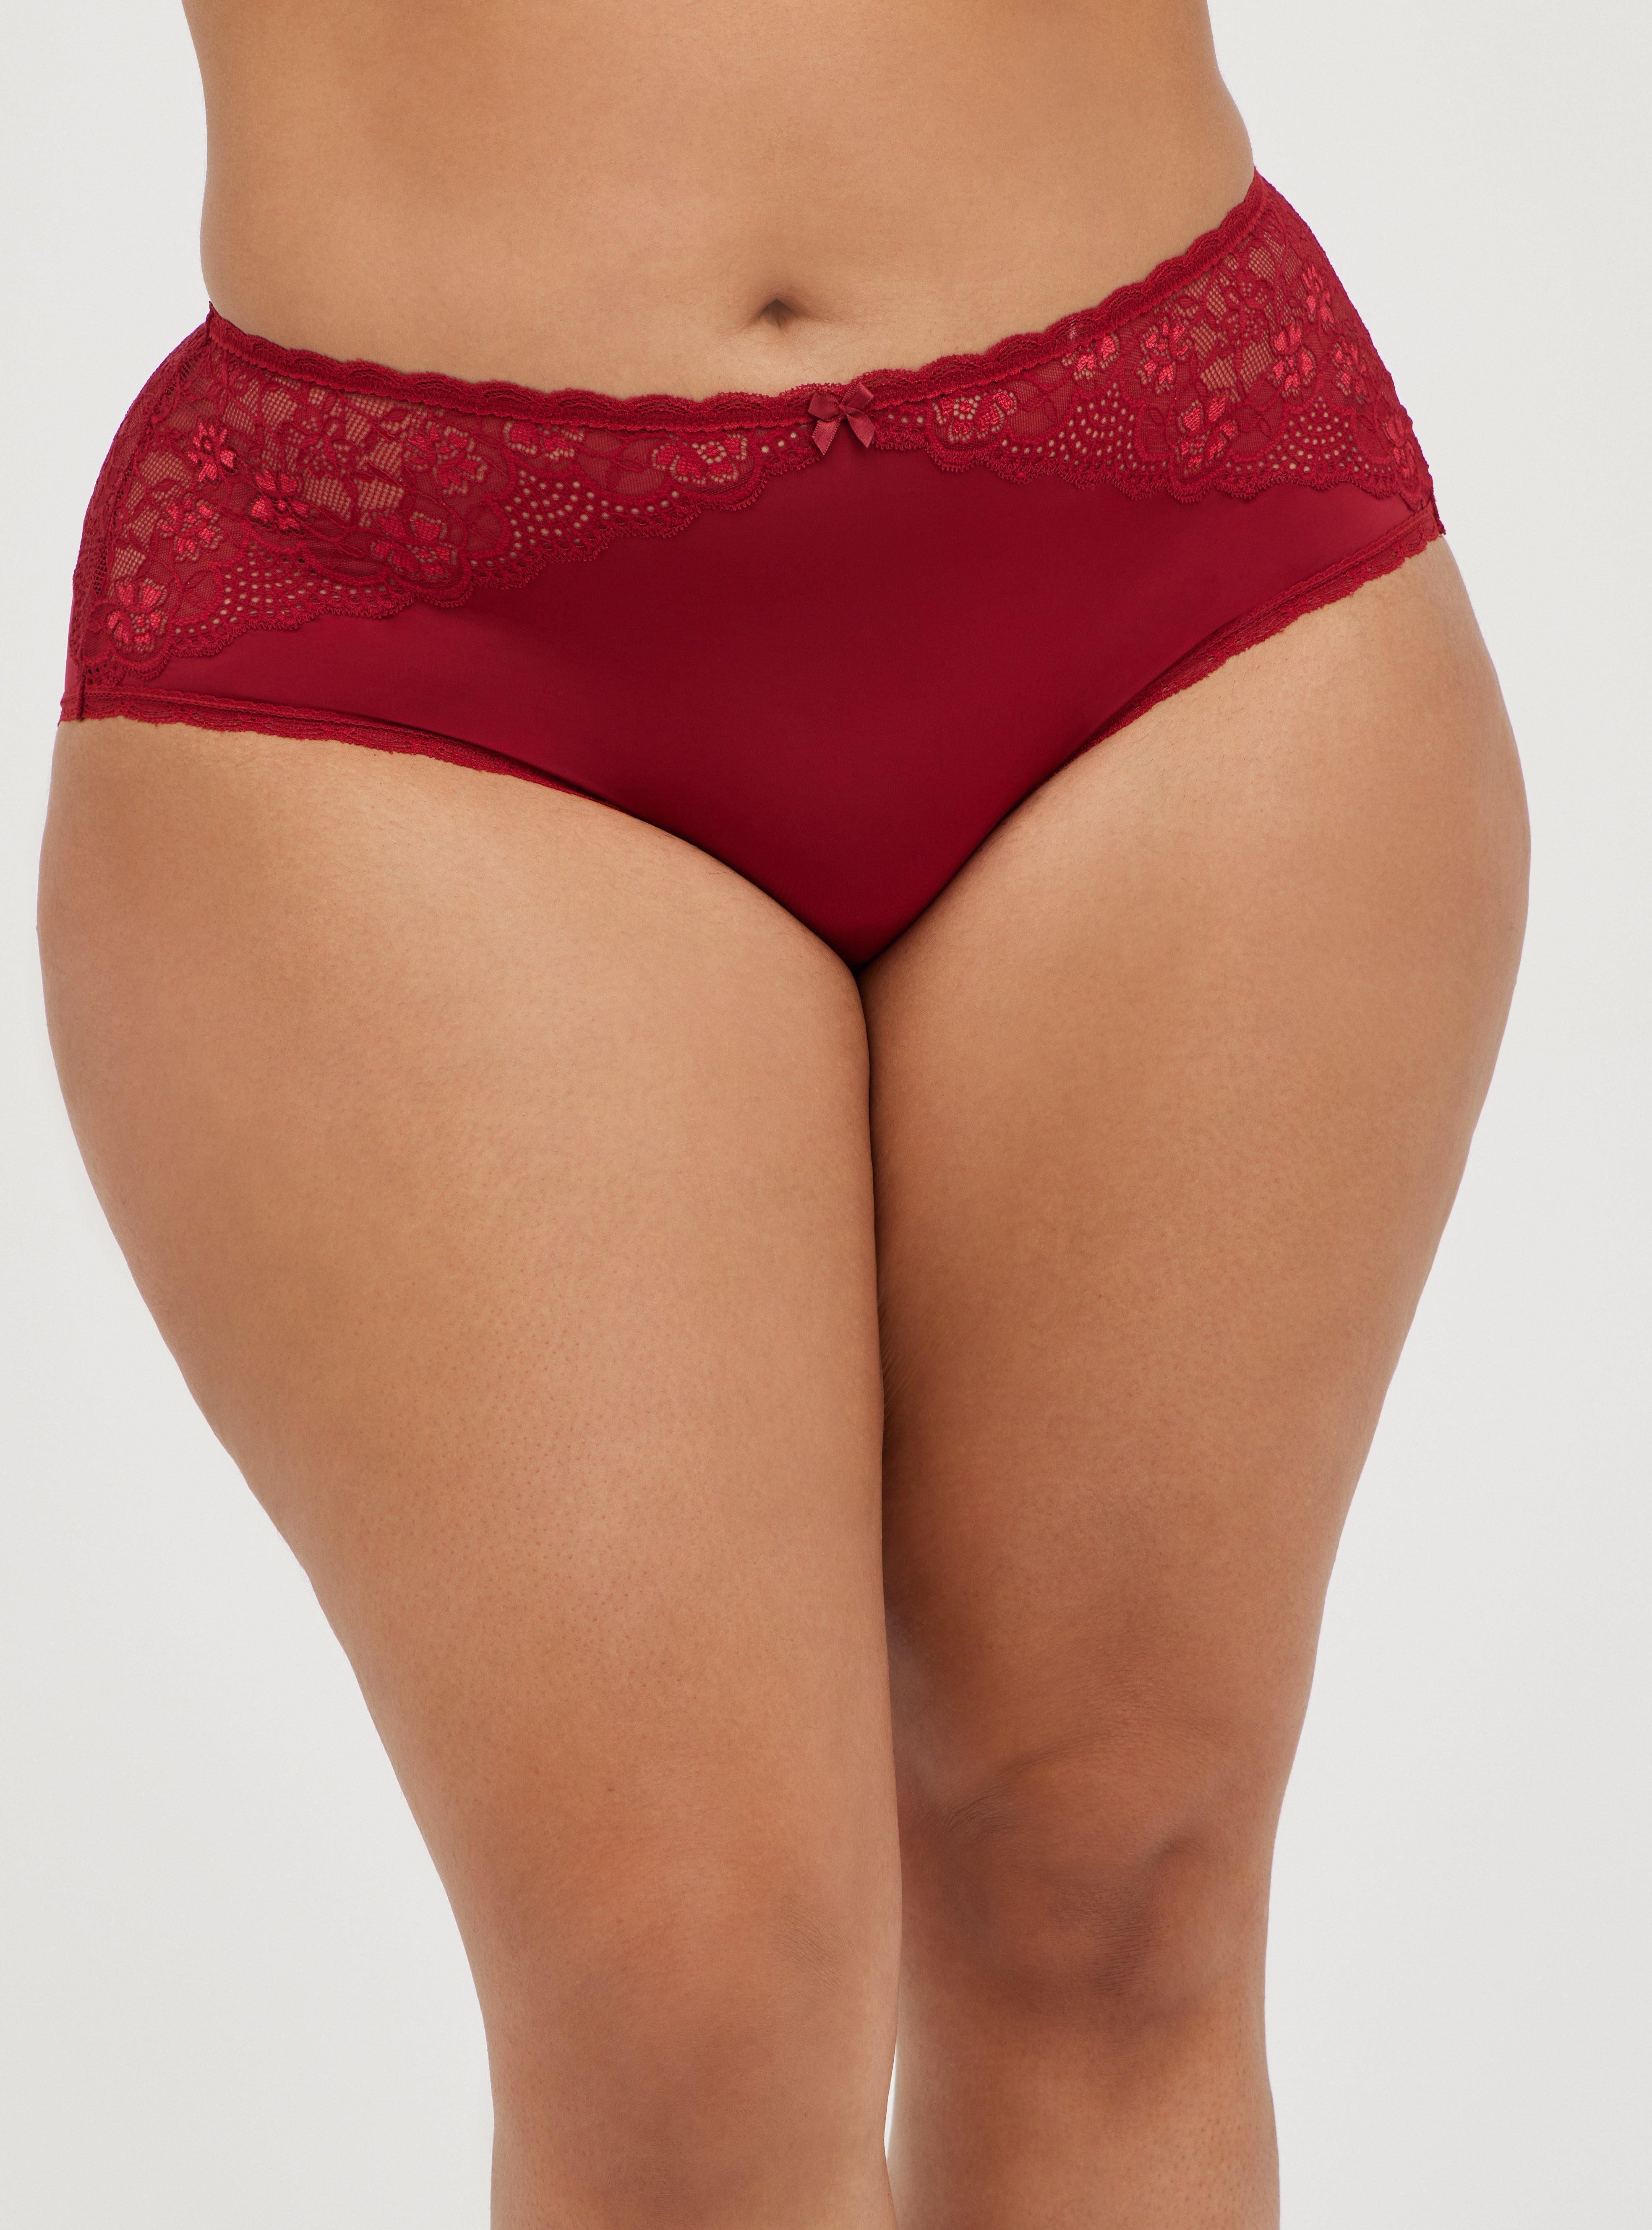 Cheeky Microfiber Panty with Lace Details